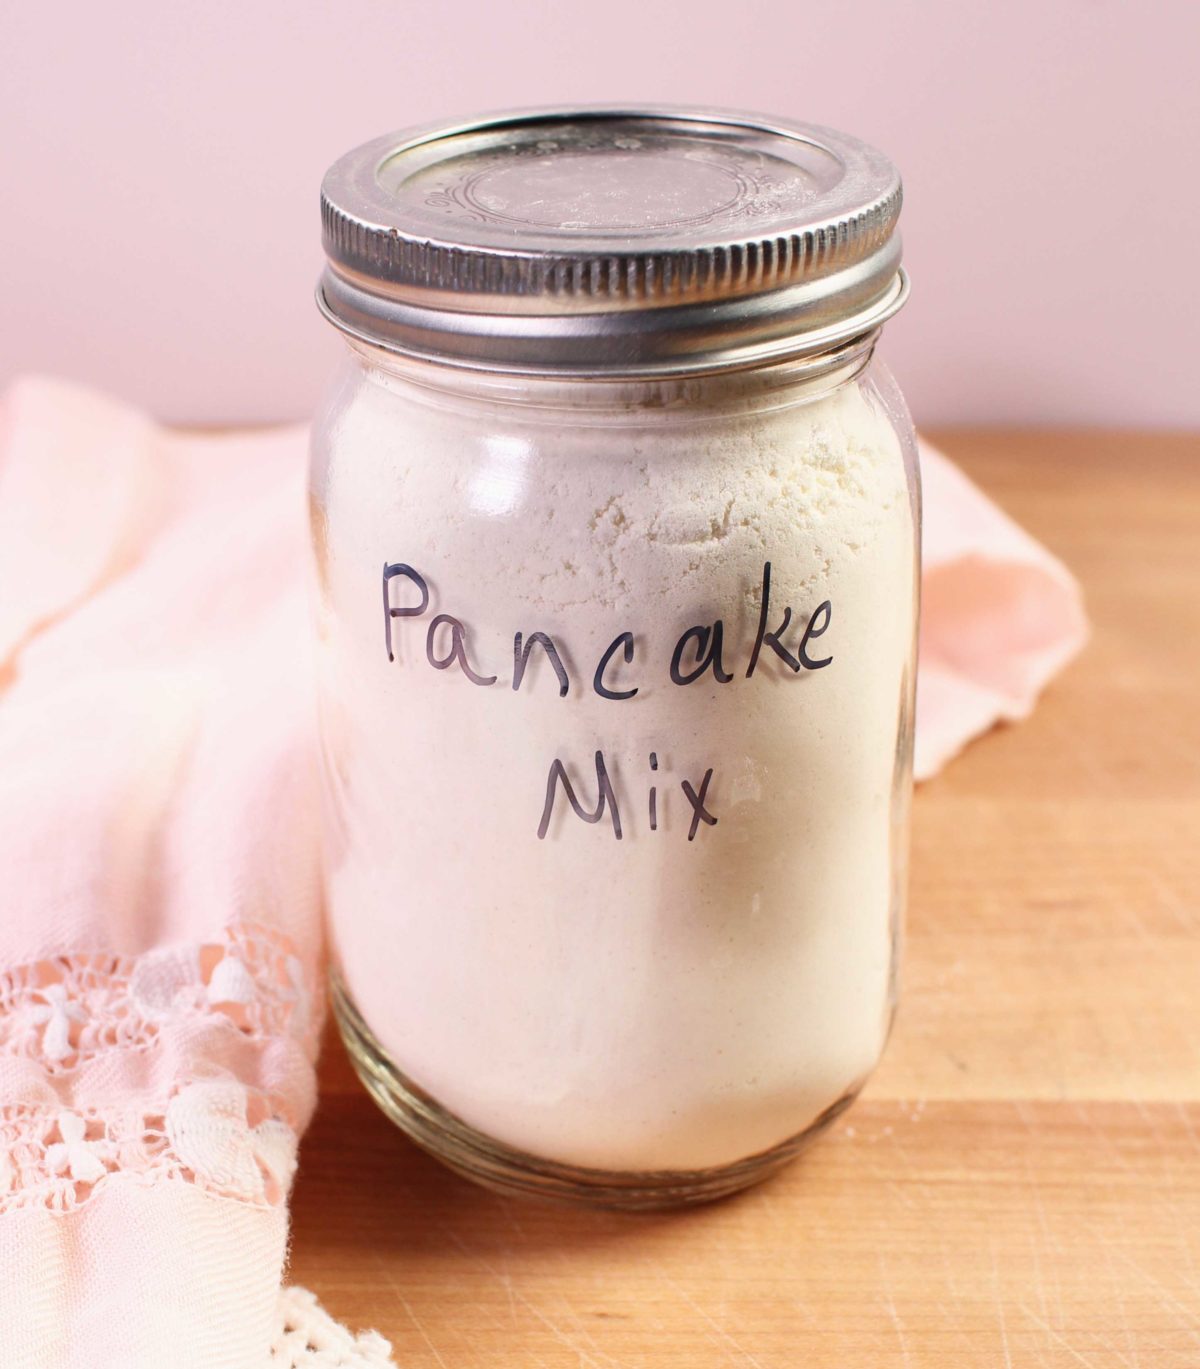 a jar of pancake mix on a brown table next to a pink napkin.